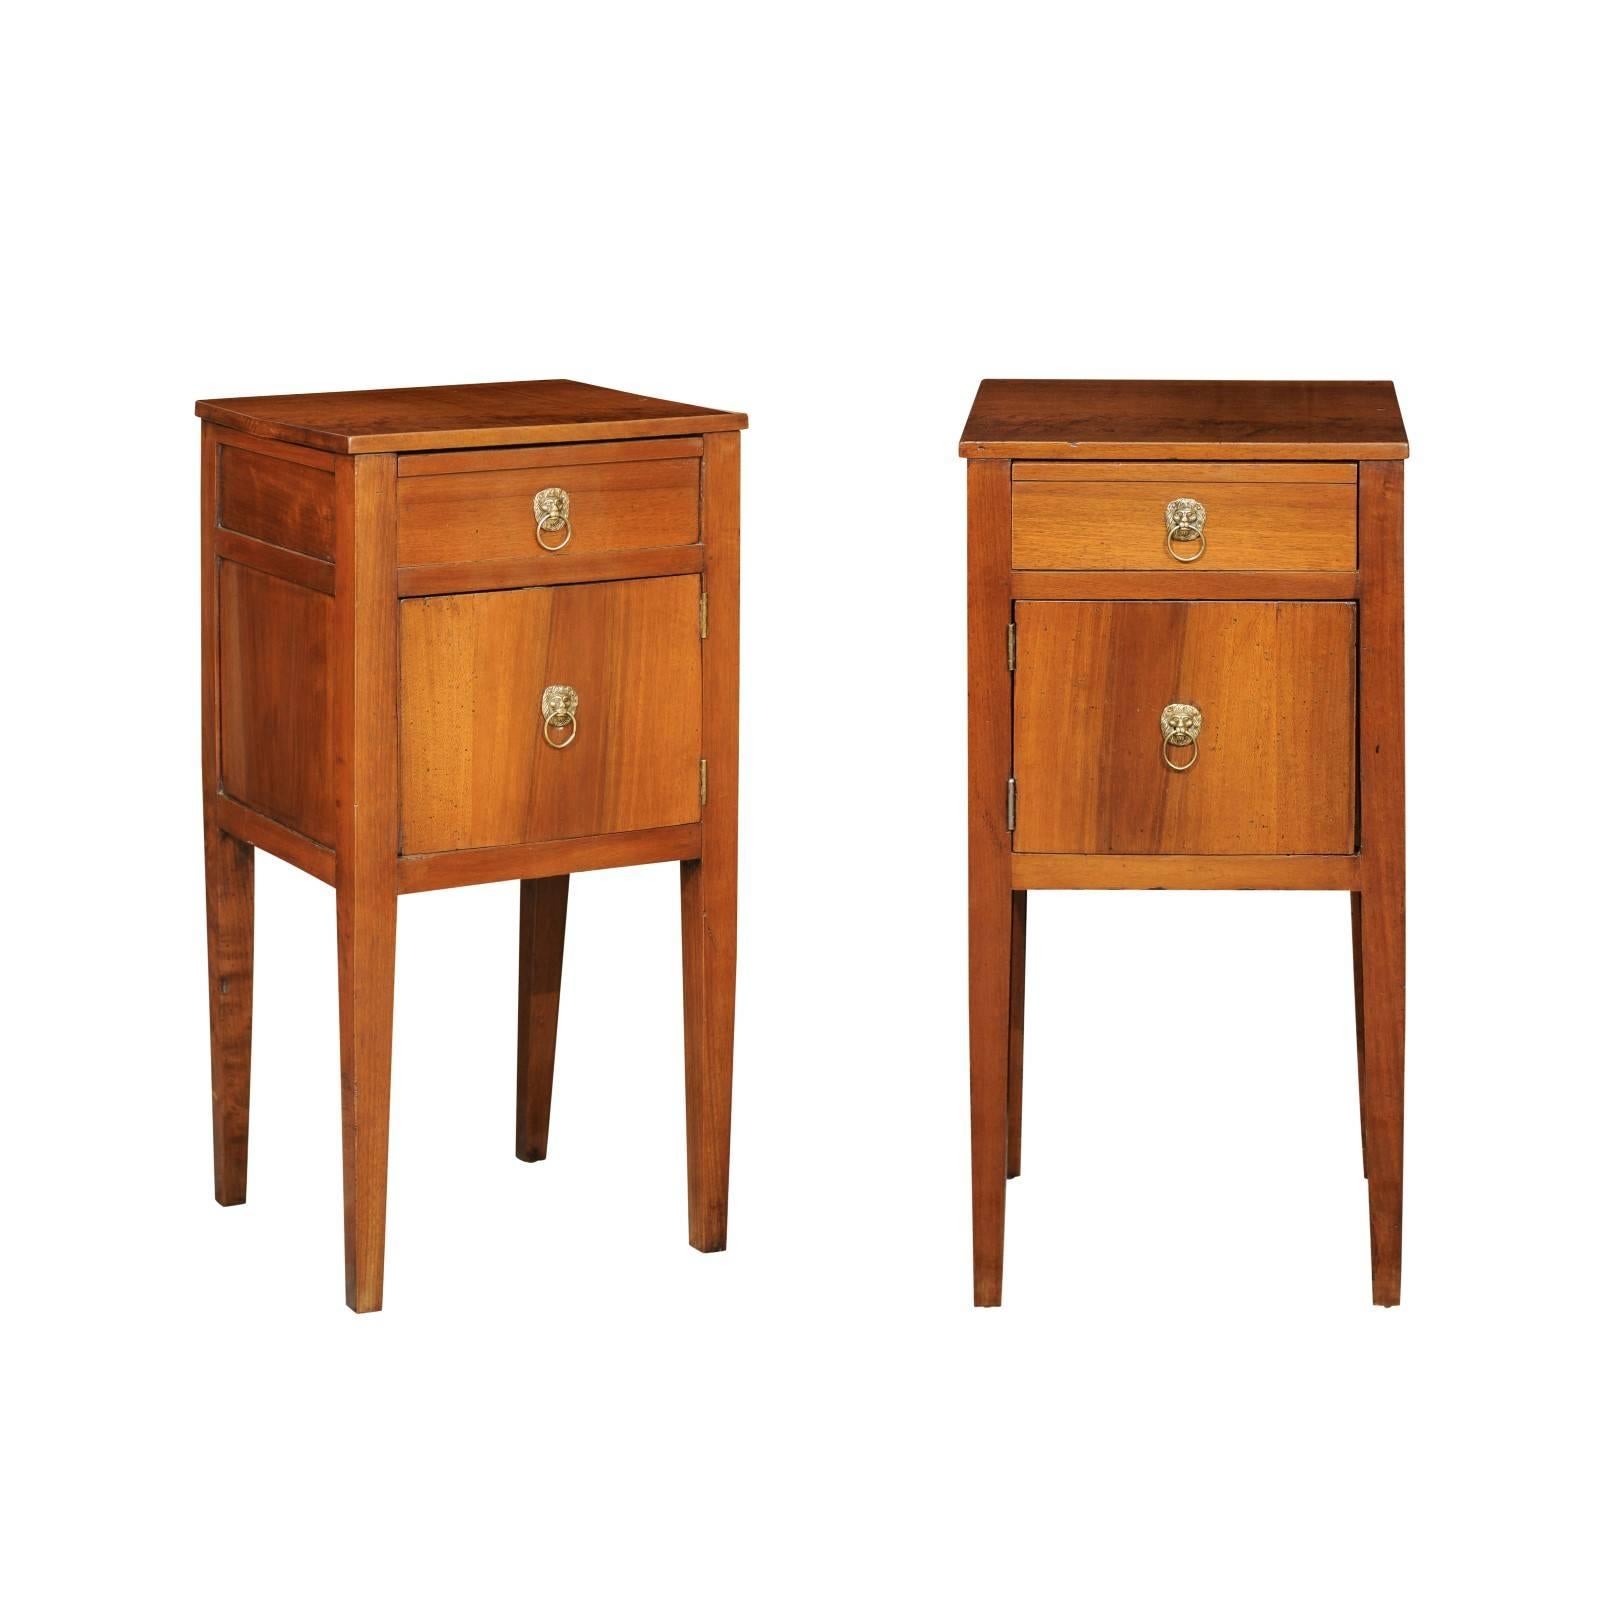 Pair of Italian Fruitwood Single-Drawer and Door Bedside Tables, circa 1850